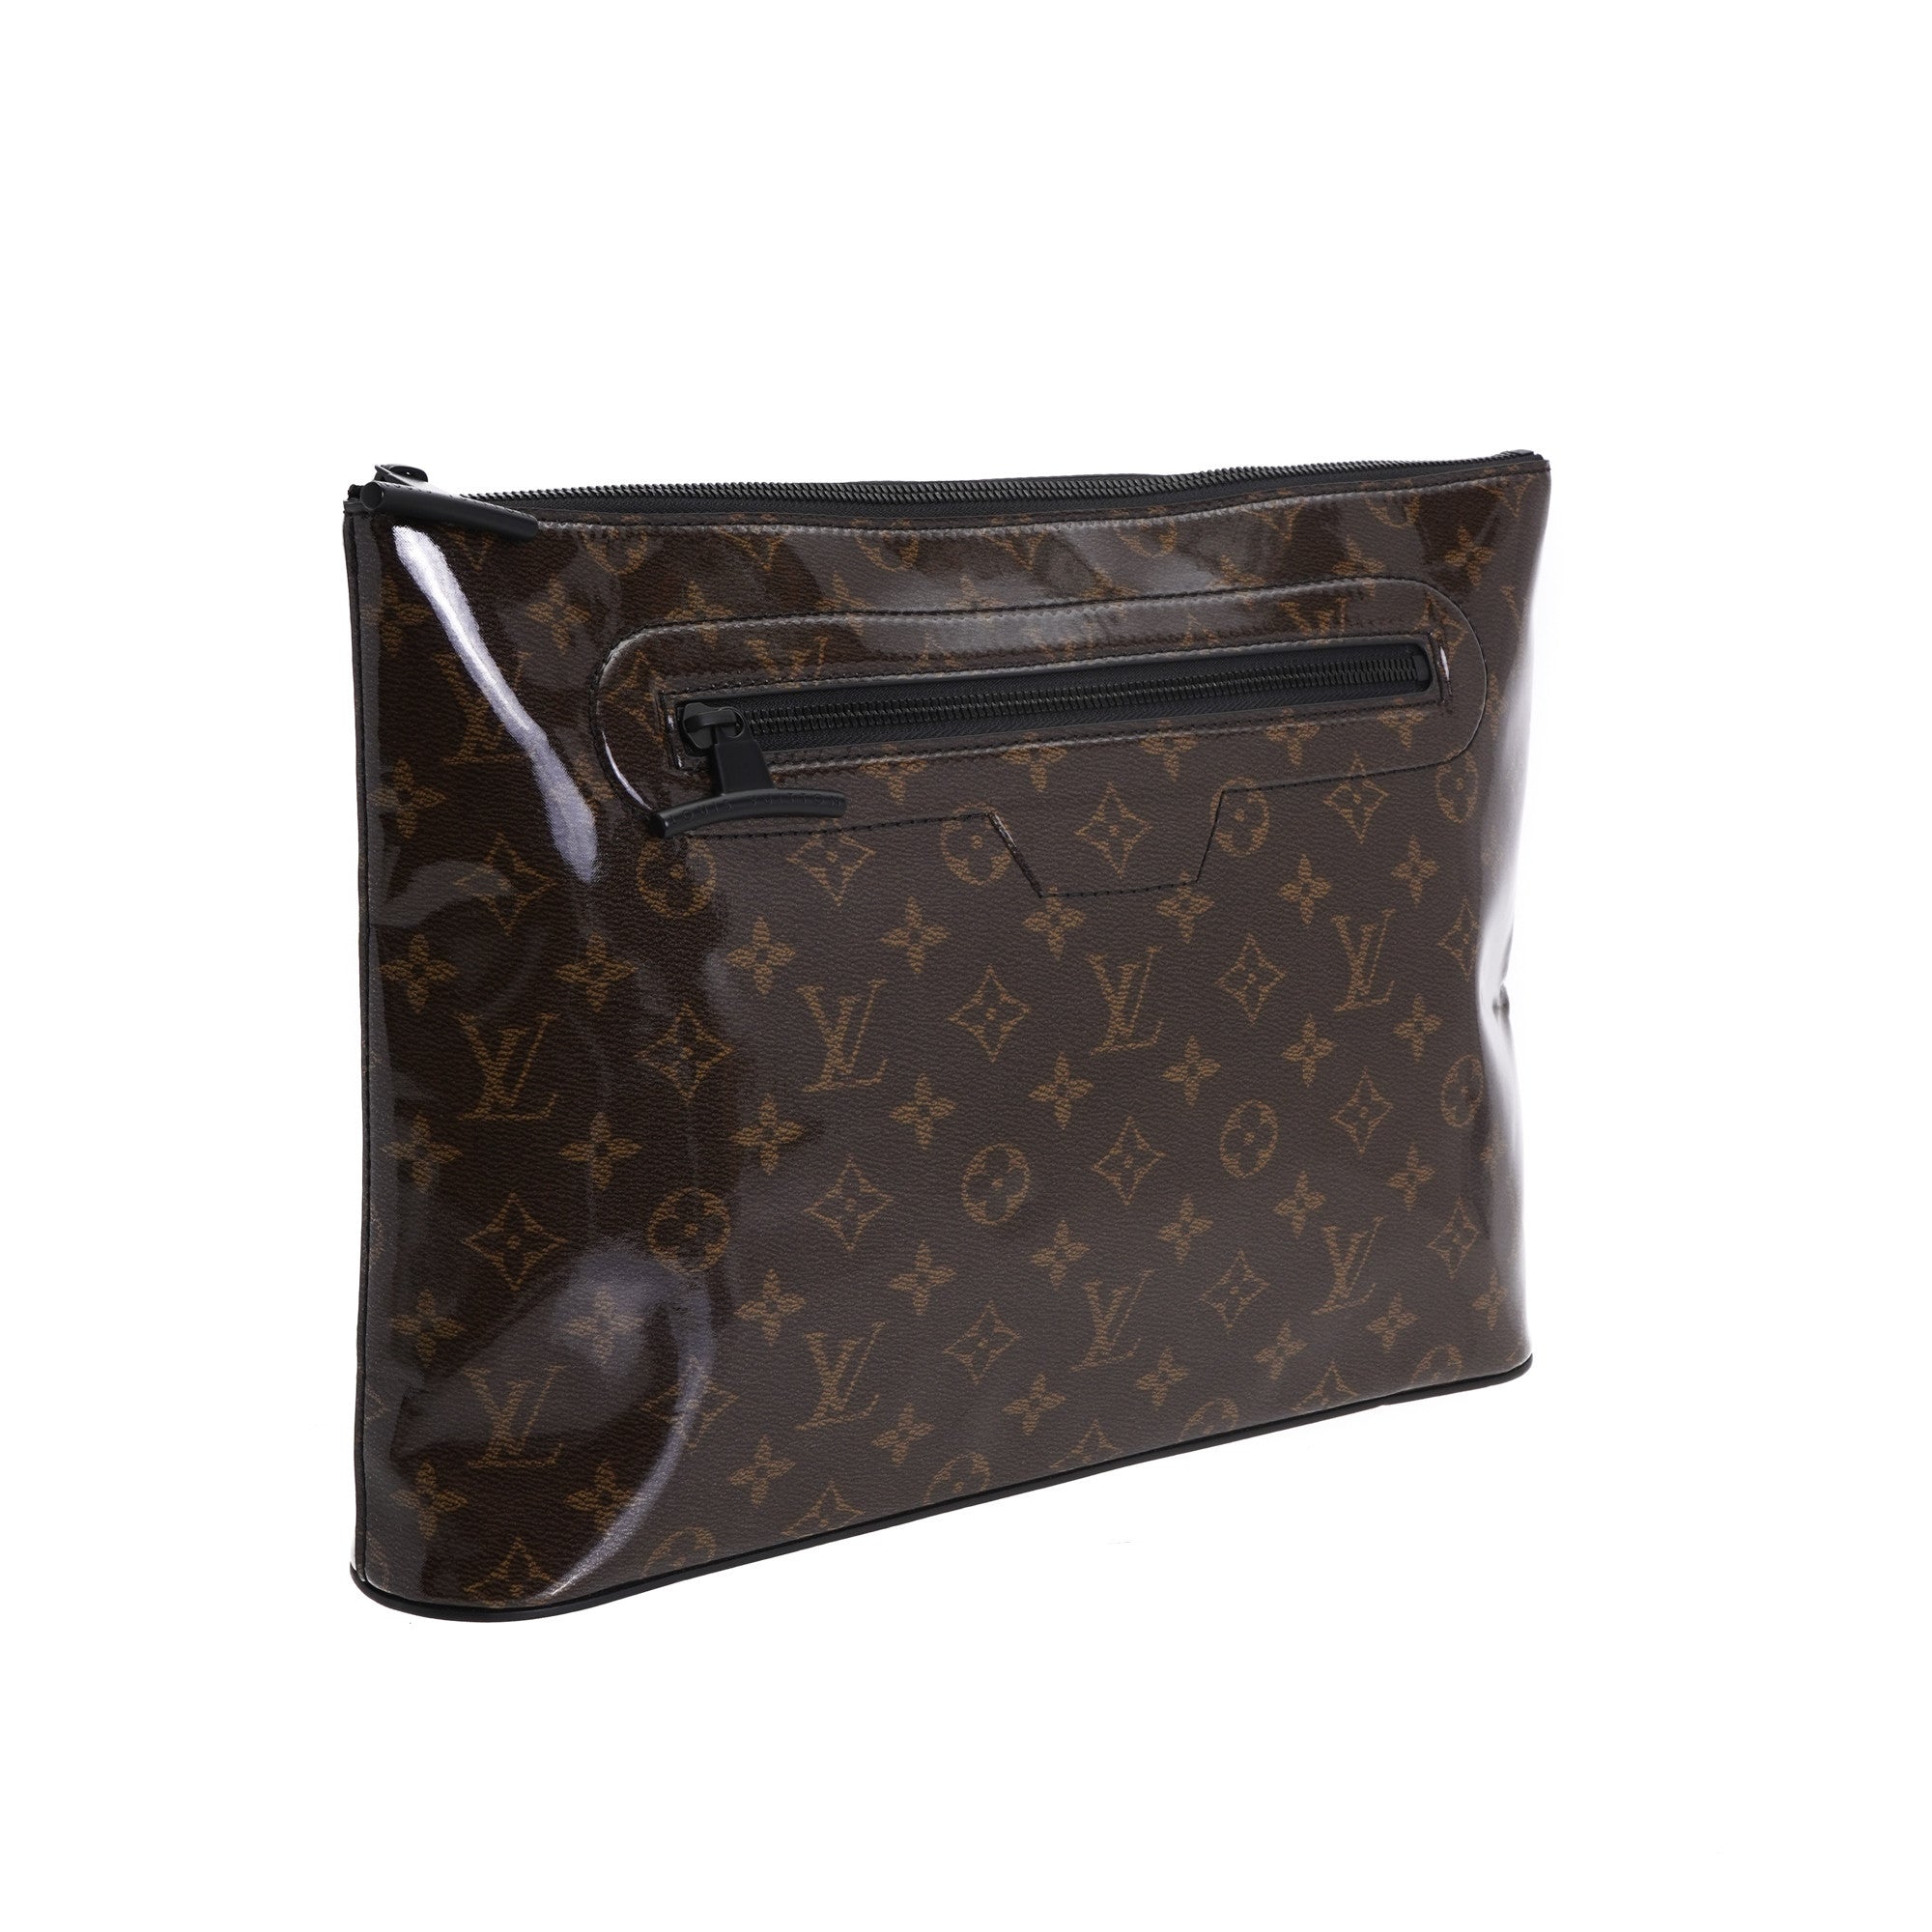 Louis Vuitton Louis Vuitton Vertical Truck Pochette buy in United States  with free shipping CosmoStore